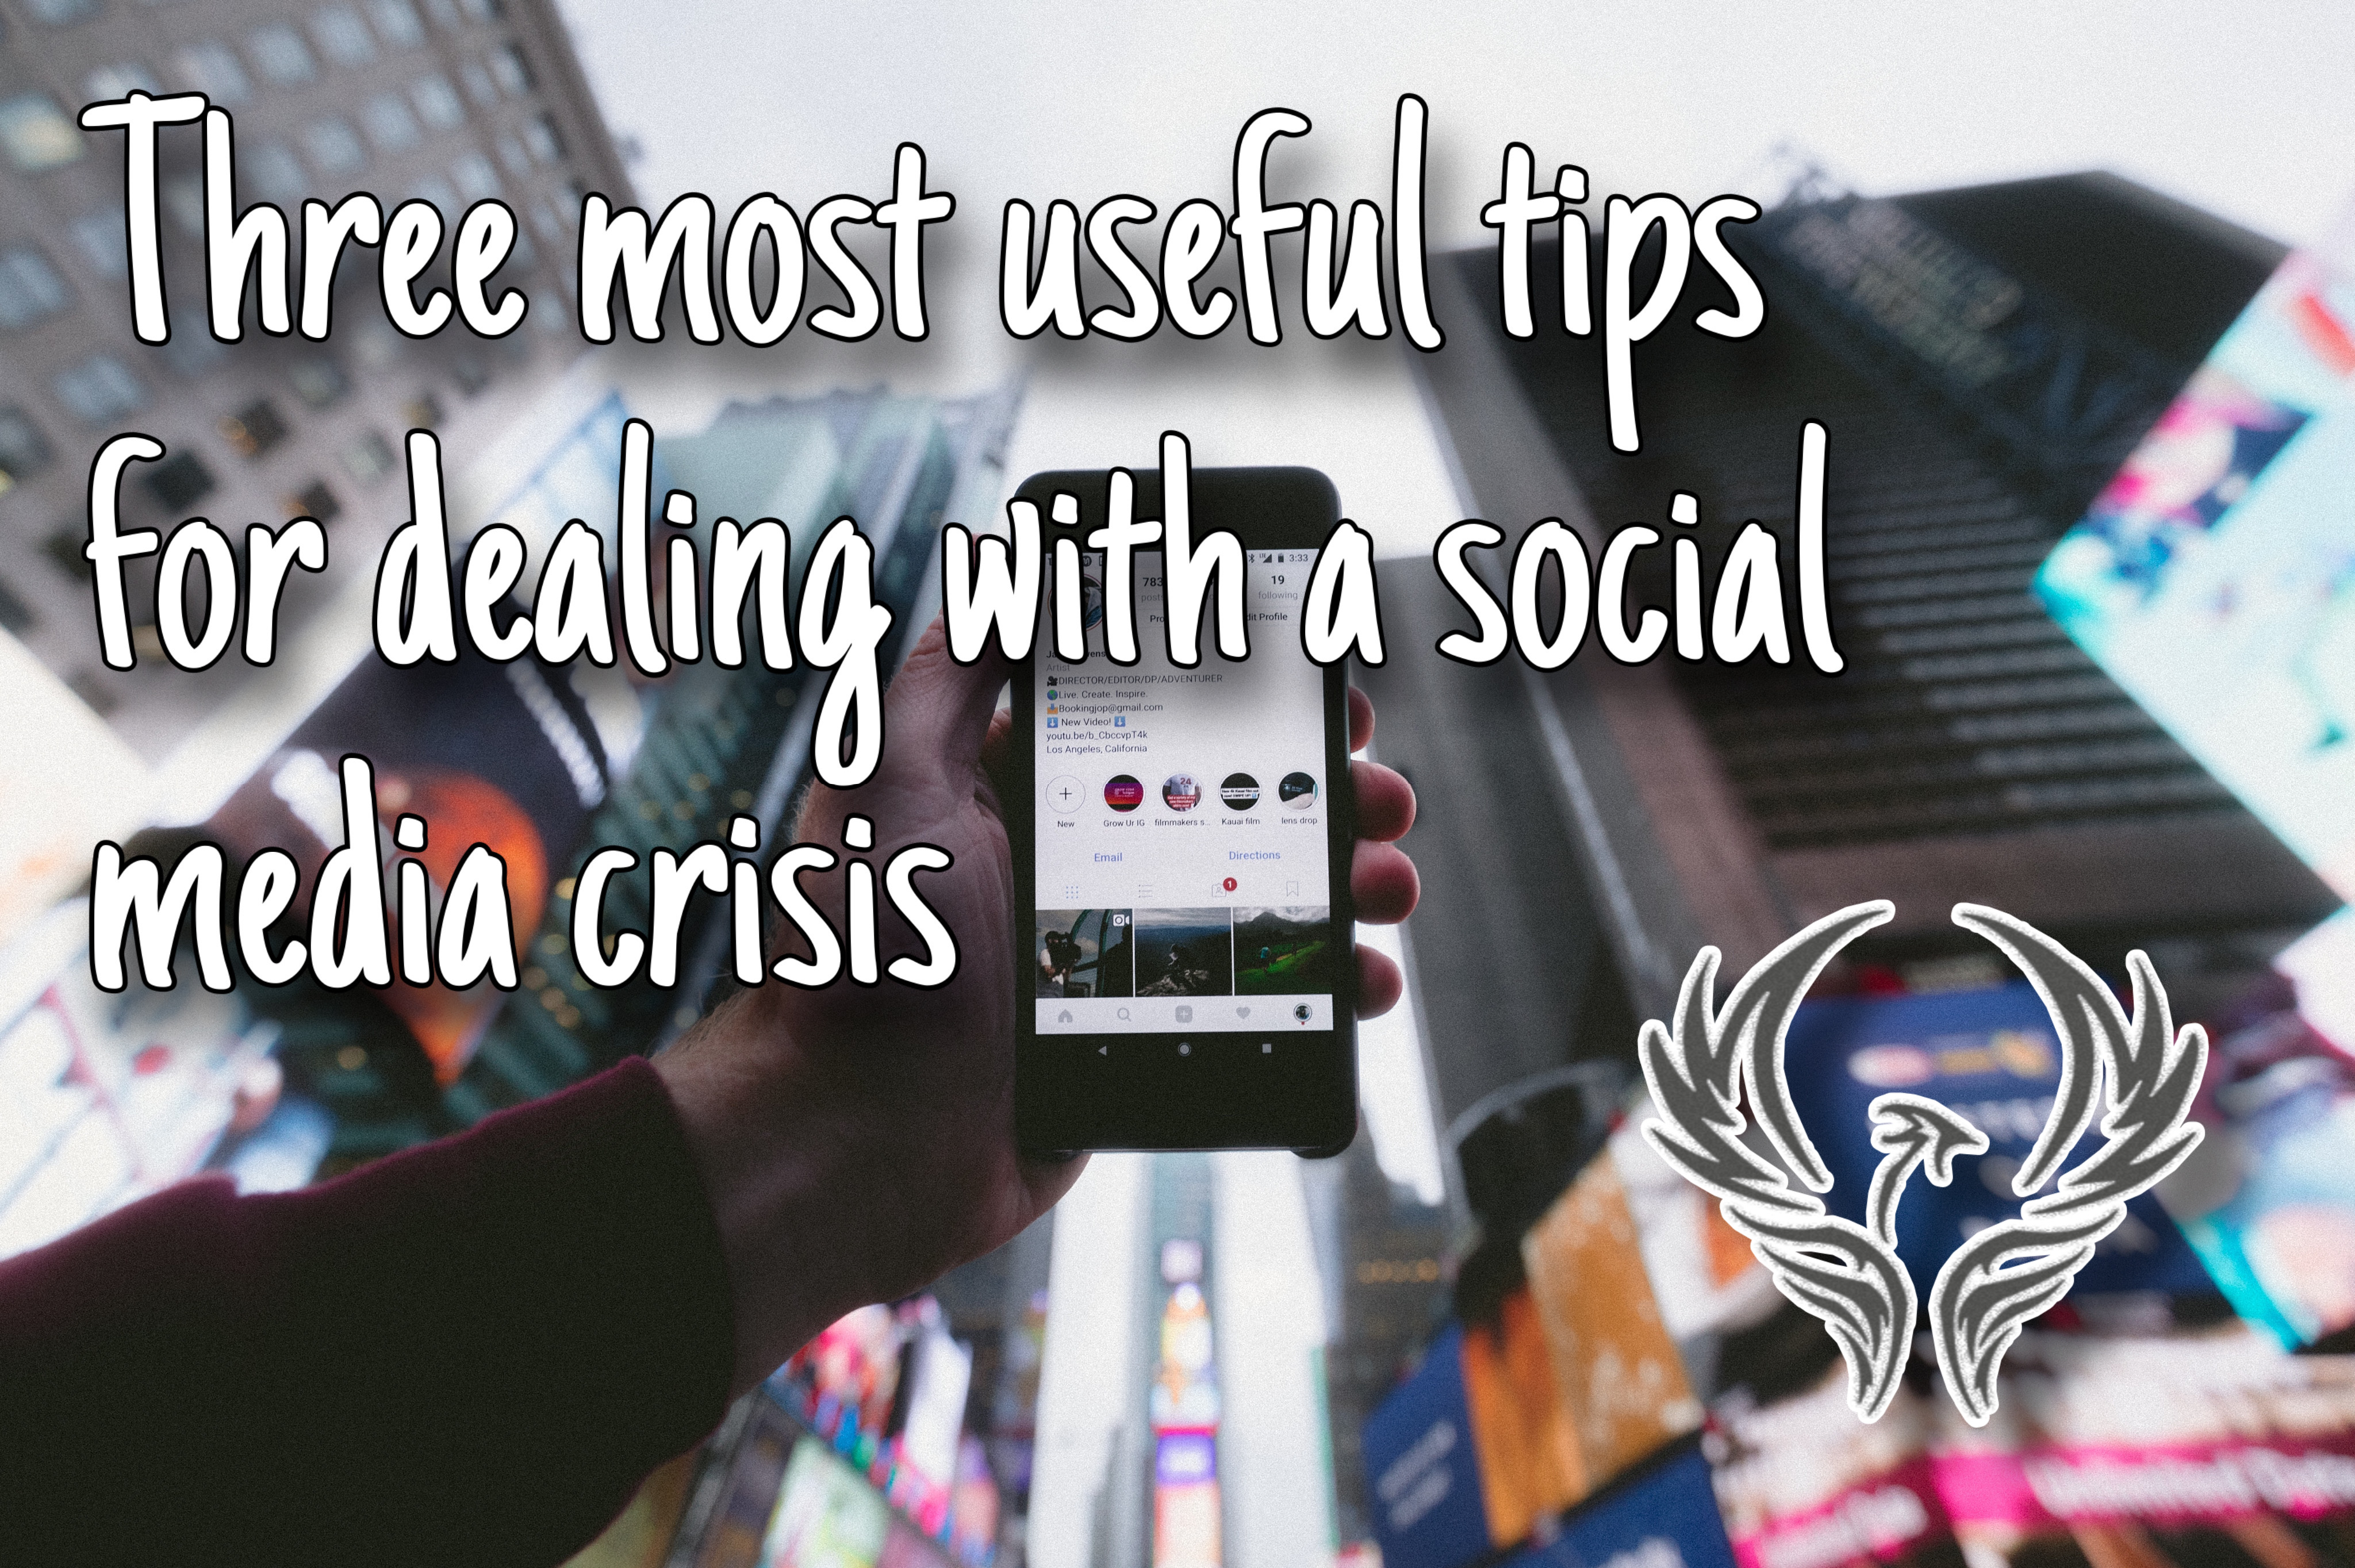 Three most useful tips for dealing with a social media crisis - Chris TDL